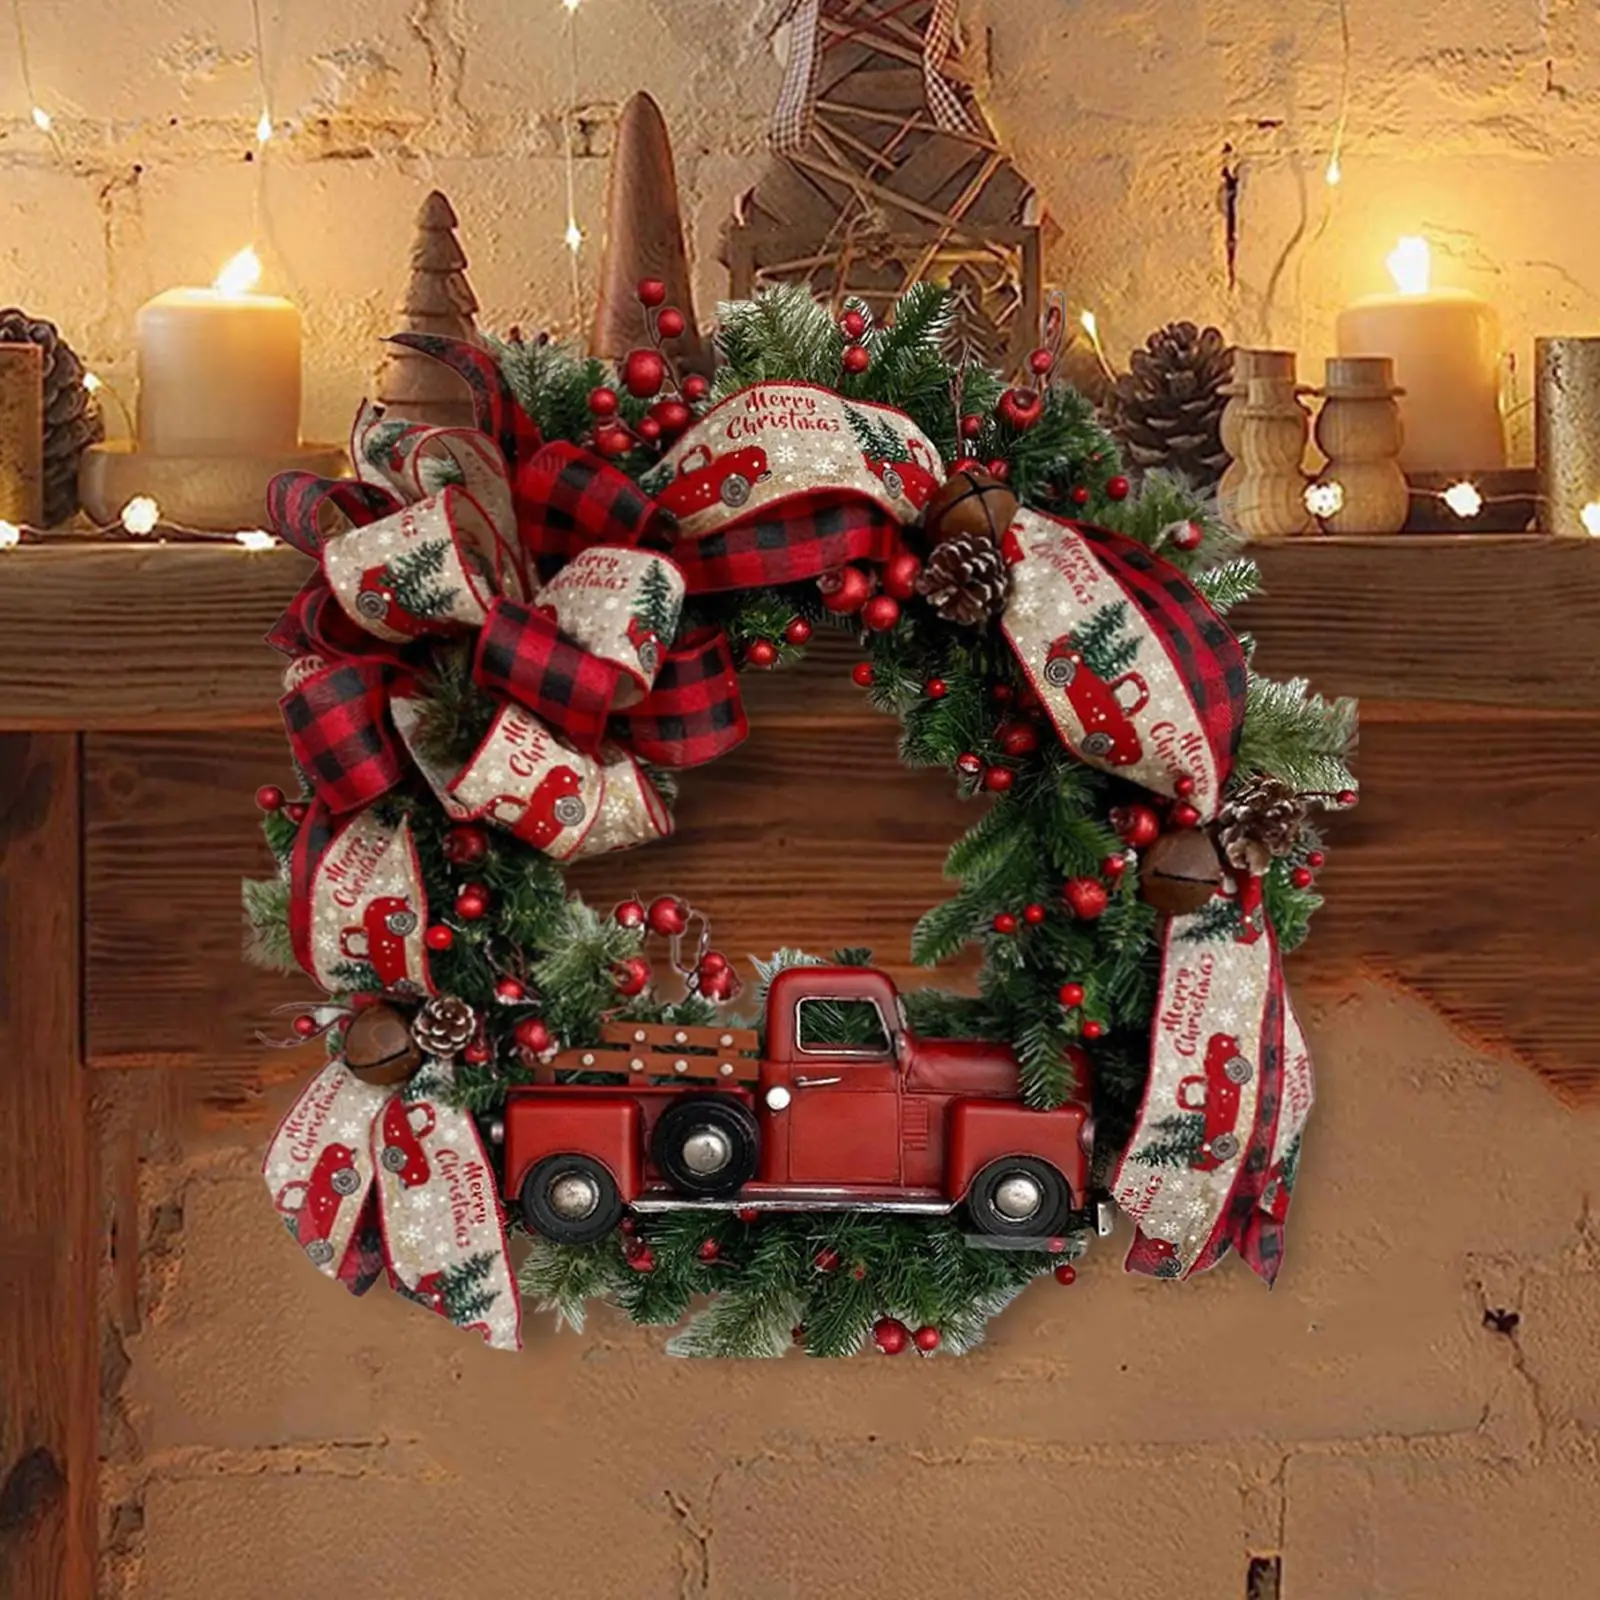 Christmas Artificial Flower Wreath Red Car Hanging Ornament Door Hanging Winter Wreath for Farmhouse Xmas Indoor New Year Party